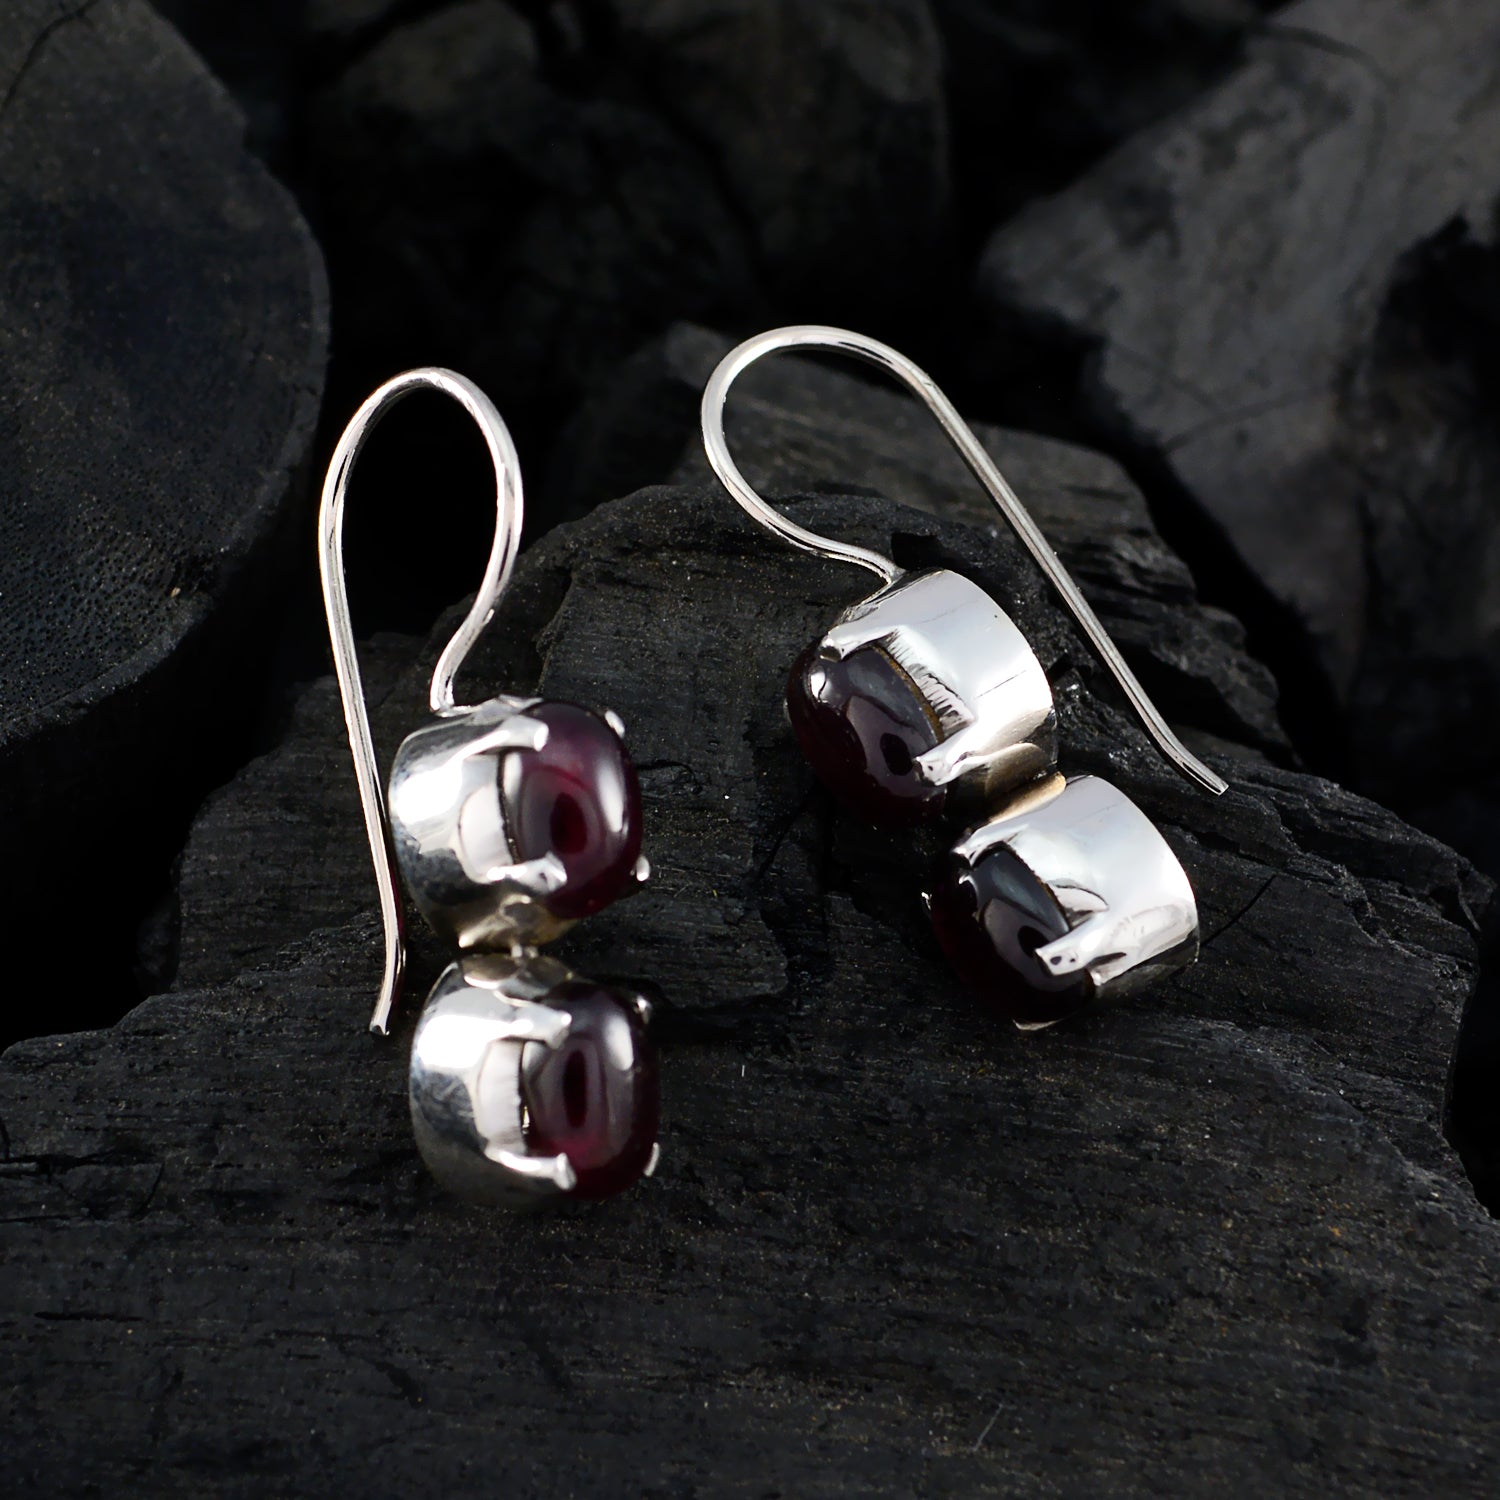 Riyo Real Gemstones oval Cabochon Red Garnet Silver Earrings gift for daughter's day